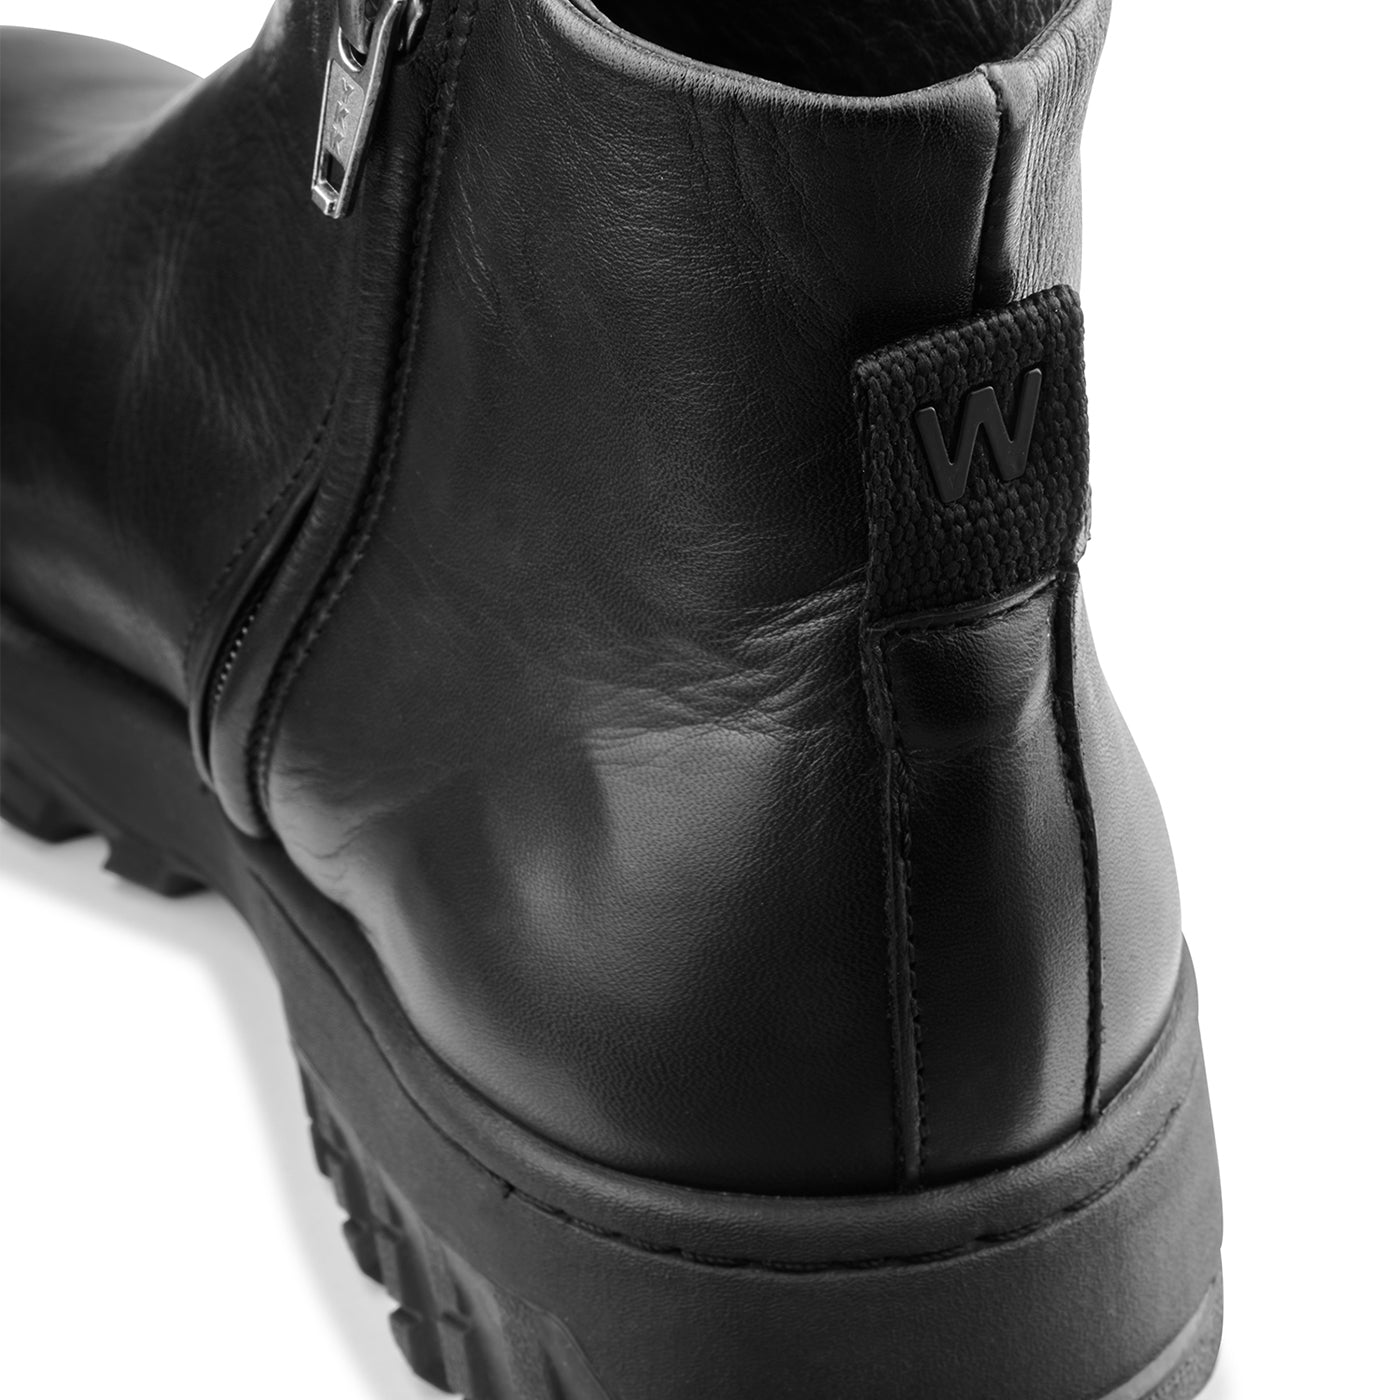 WODEN Abbi Track Leather Boots 020 Black